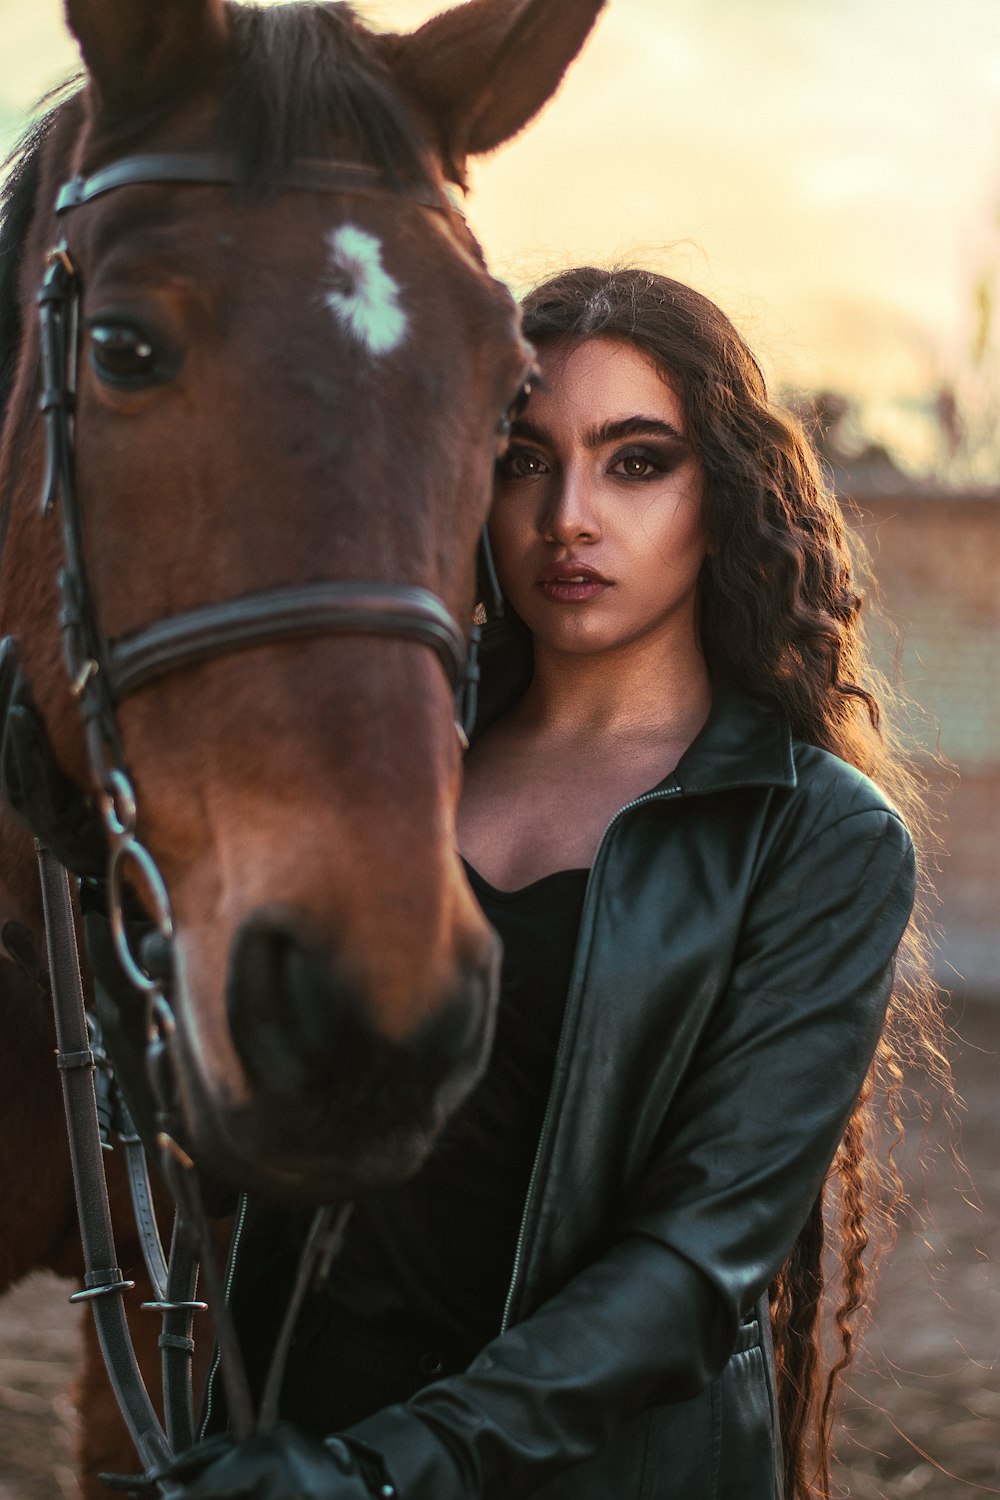 woman in black leather jacket beside brown horse during daytime